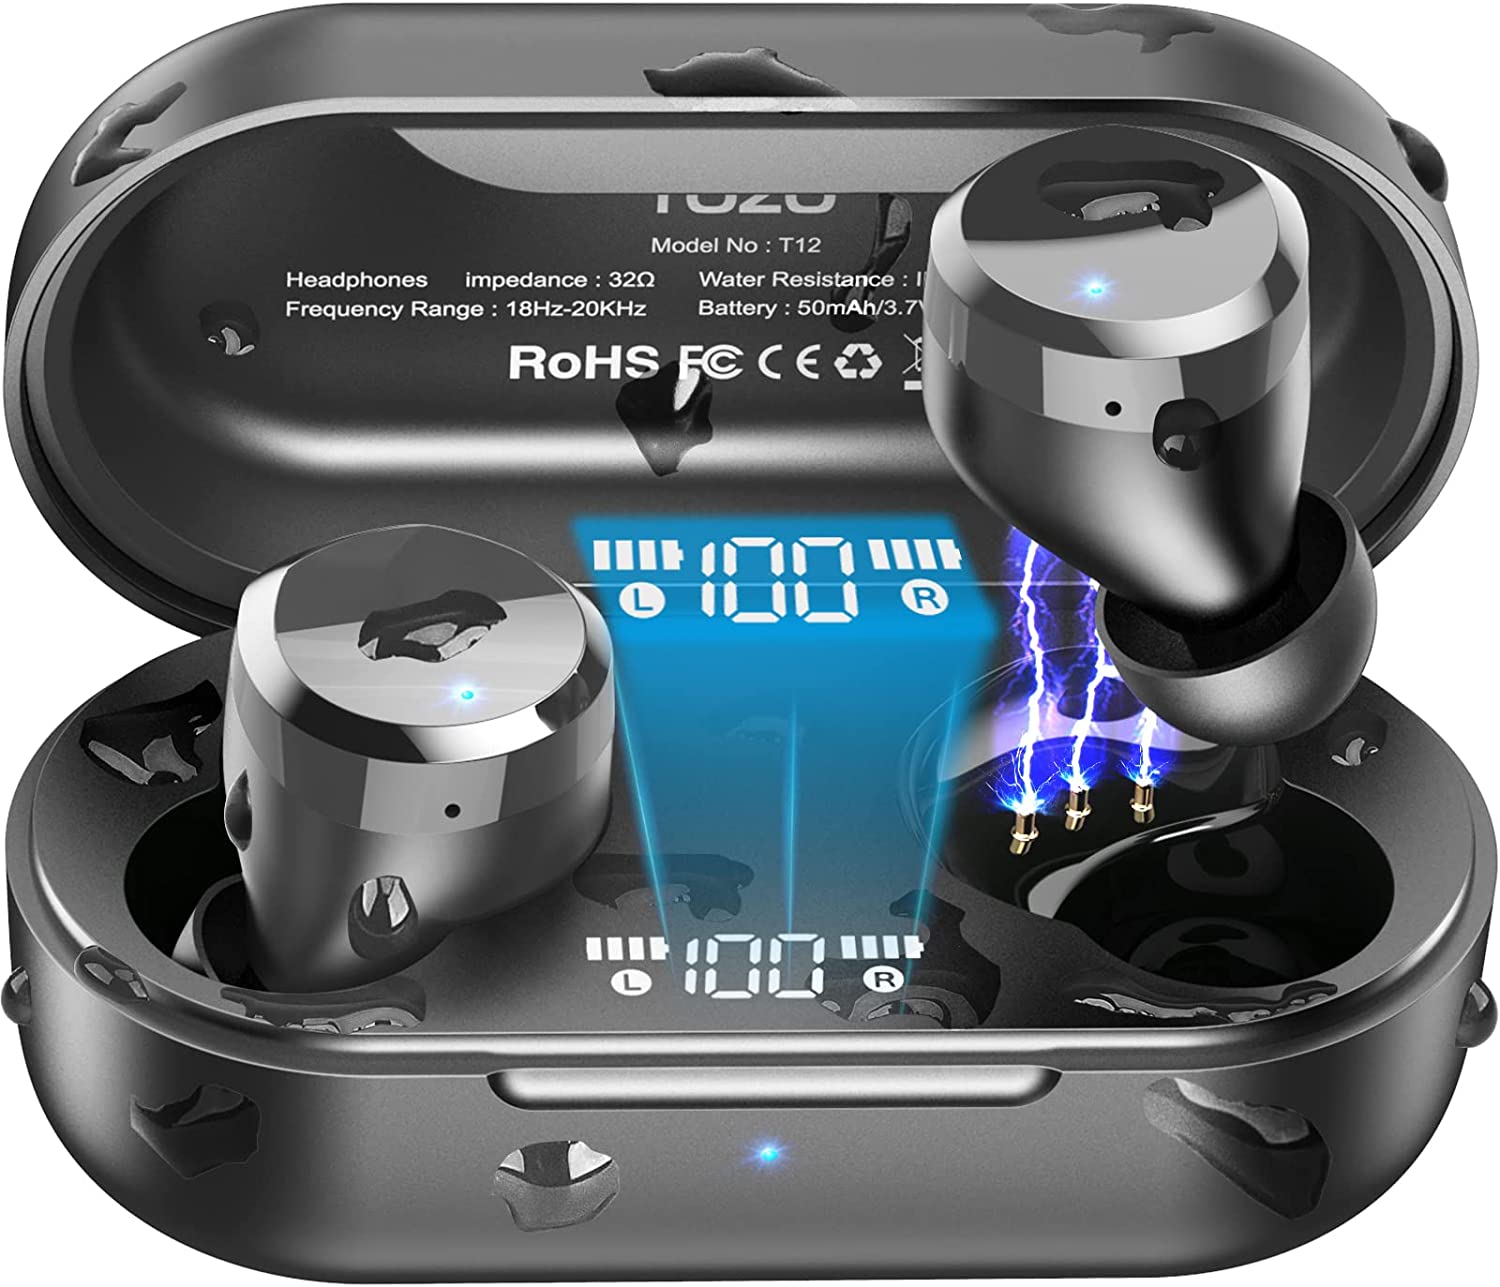 TOZO T12 Pro Earbuds Built in Mic & Wireless Charging Case